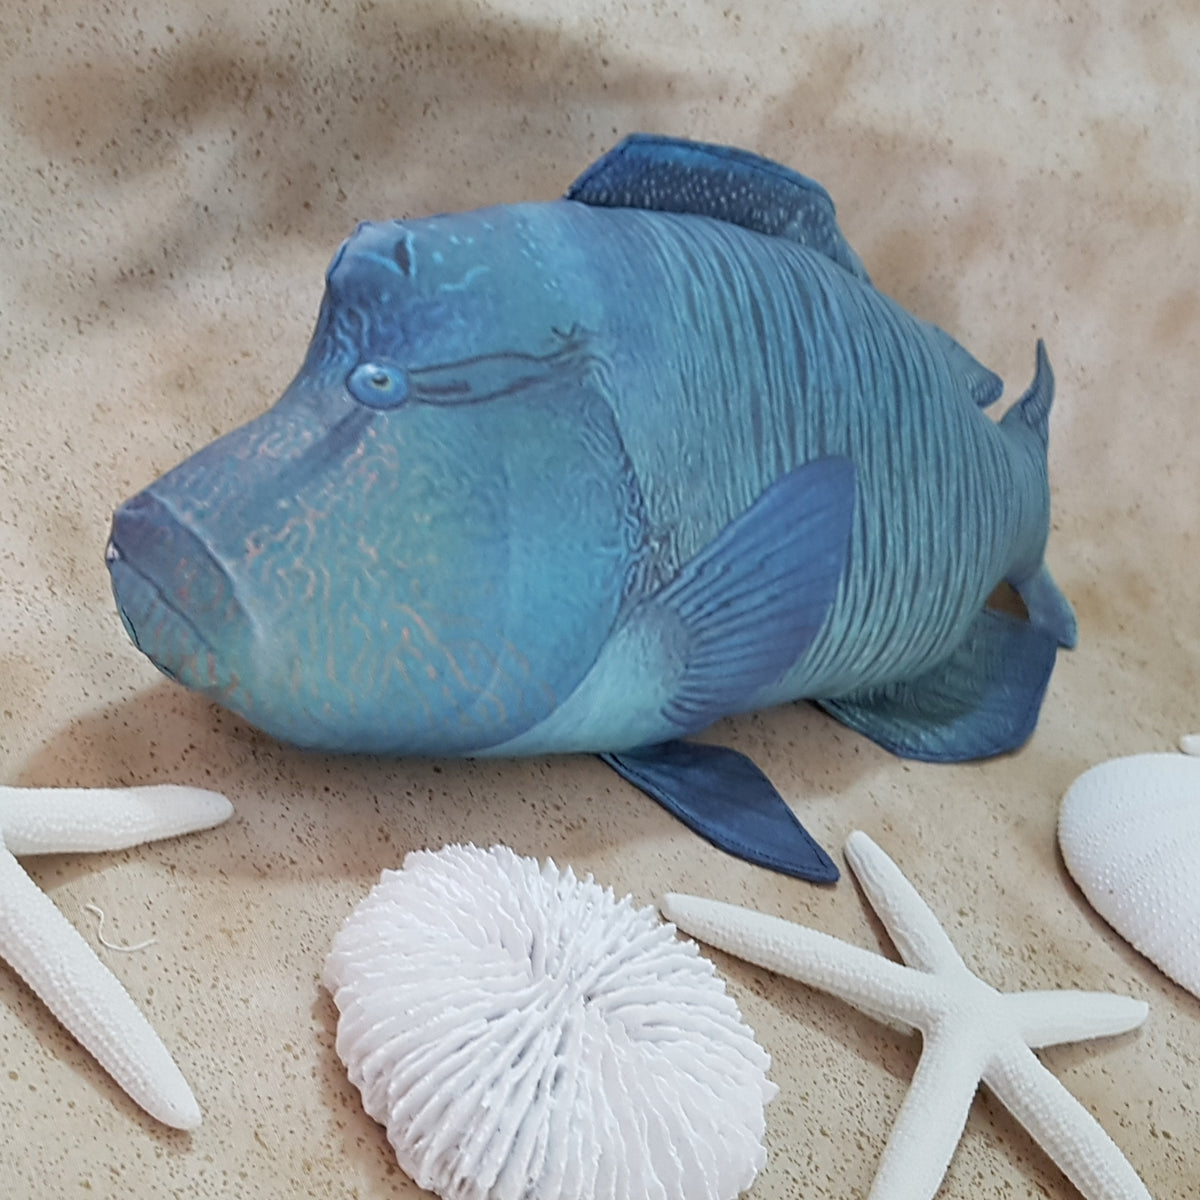 Fish, Green Humphead Wrasse, Museum Quality, Hand Painted, Rubber Fish,  Realistic Toy Figure, Model, Replica, Kids, Educational, Gift, 7 CH372  BB140 